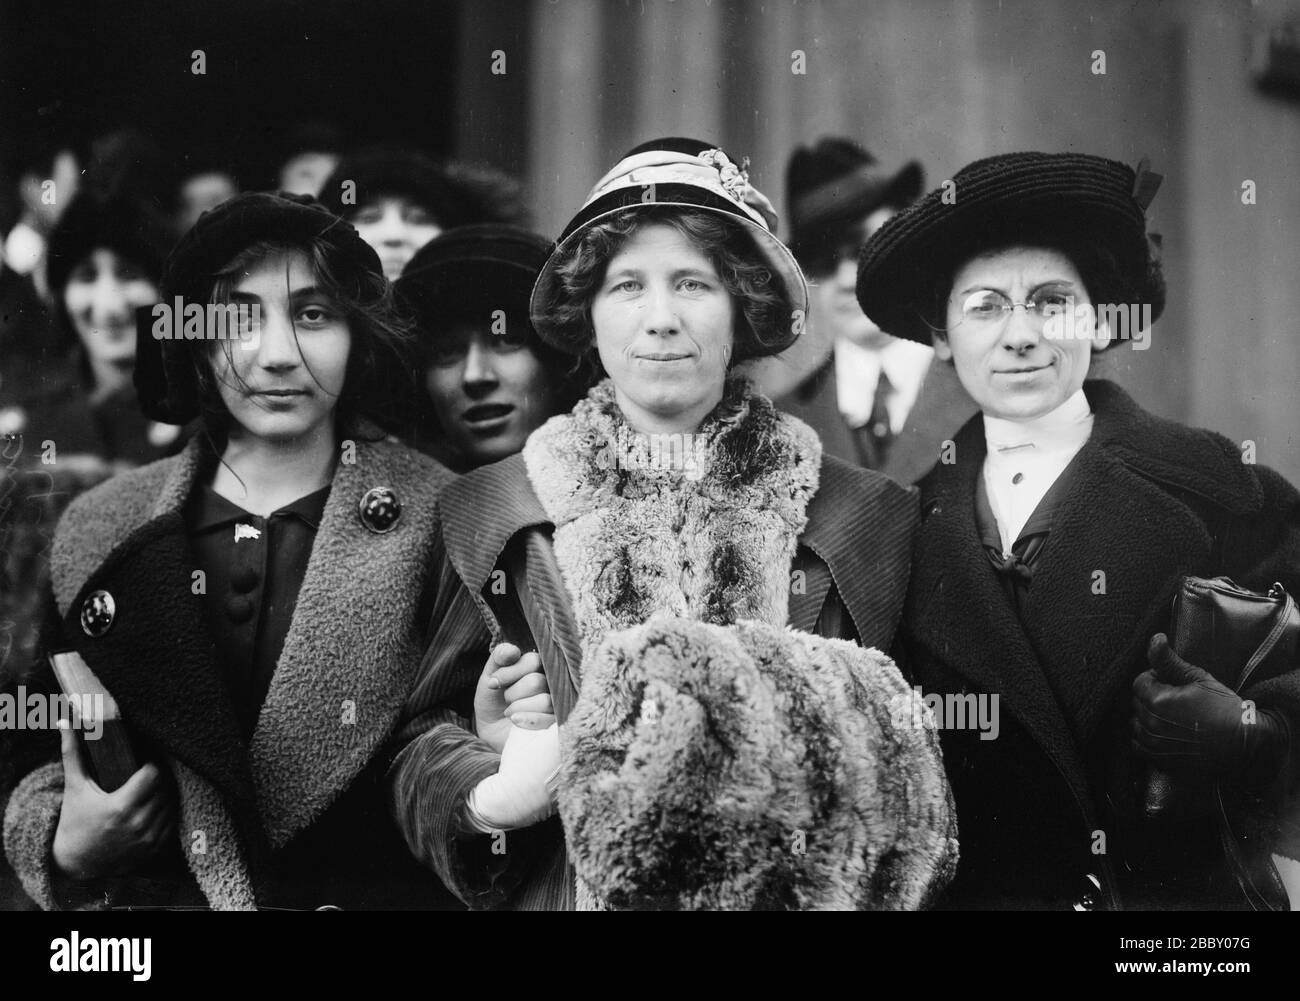 Suffrage and labor activist Flora Dodge 'Fola' La Follette (1882-1970), social reformer and missionary Rose Livingston and a young striker during a garment strike in New York City in 1913 Stock Photo